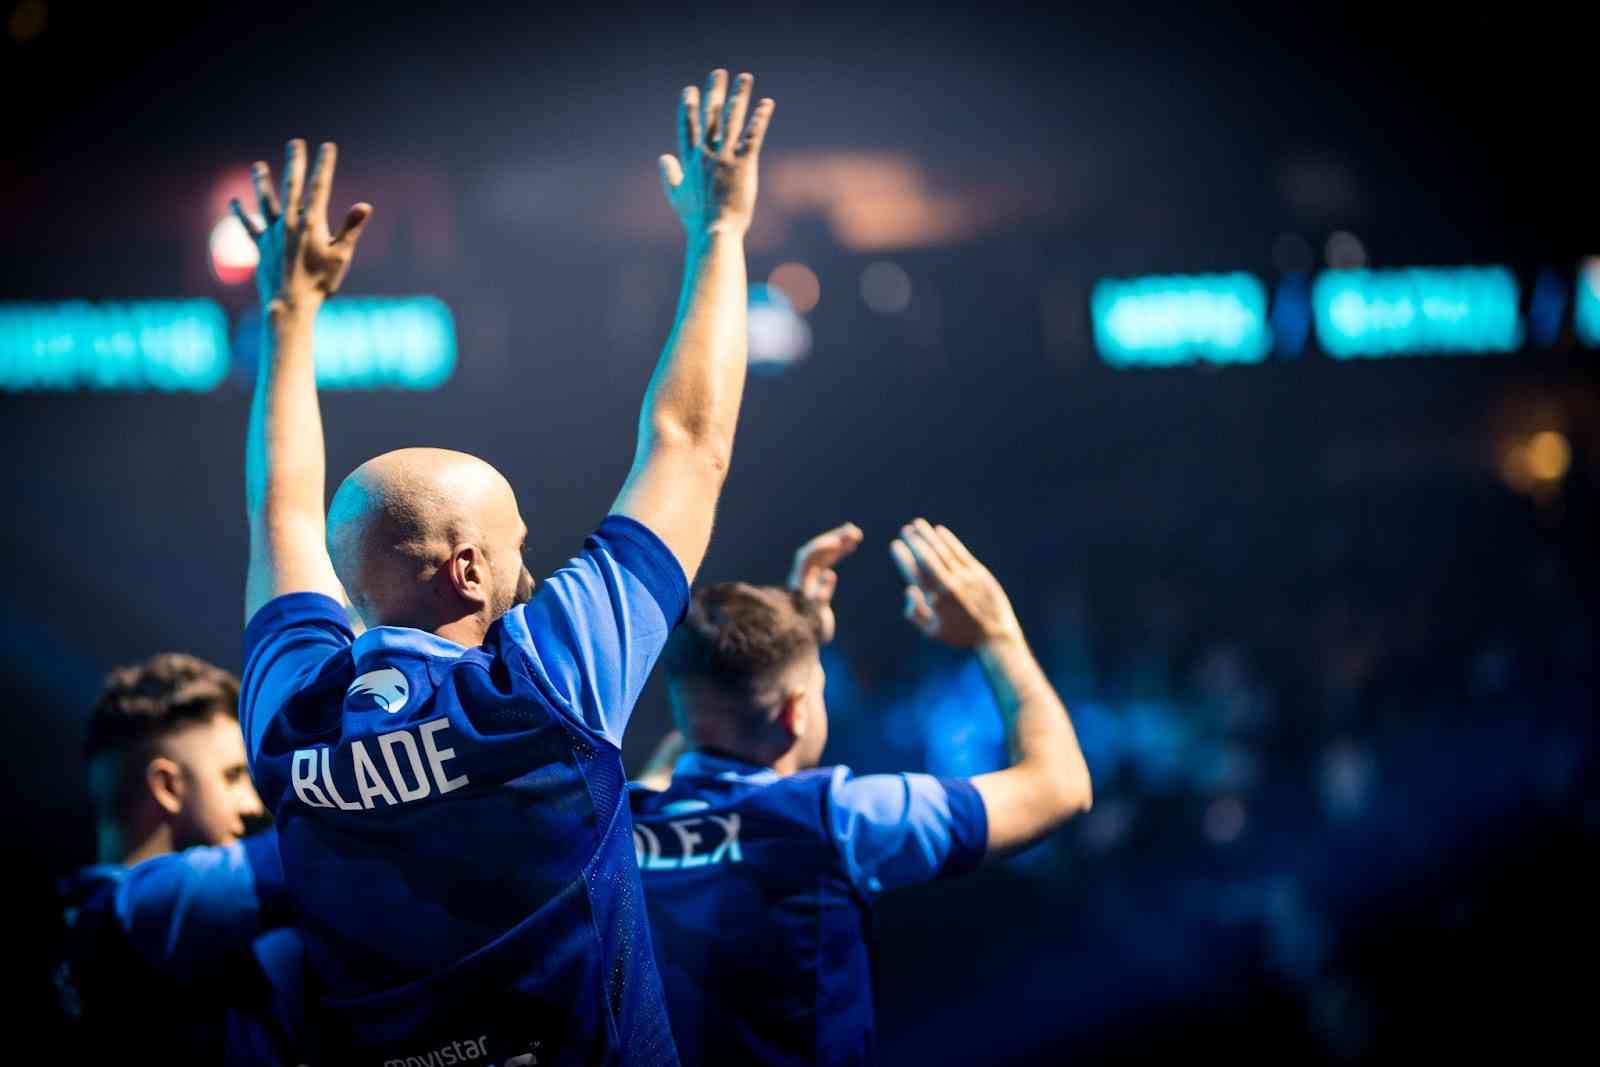 Movistar Riders coach Galder "bladE" Barcena lifts his hands up toward the crowd as the team take the stage at IEM Cologne 2022